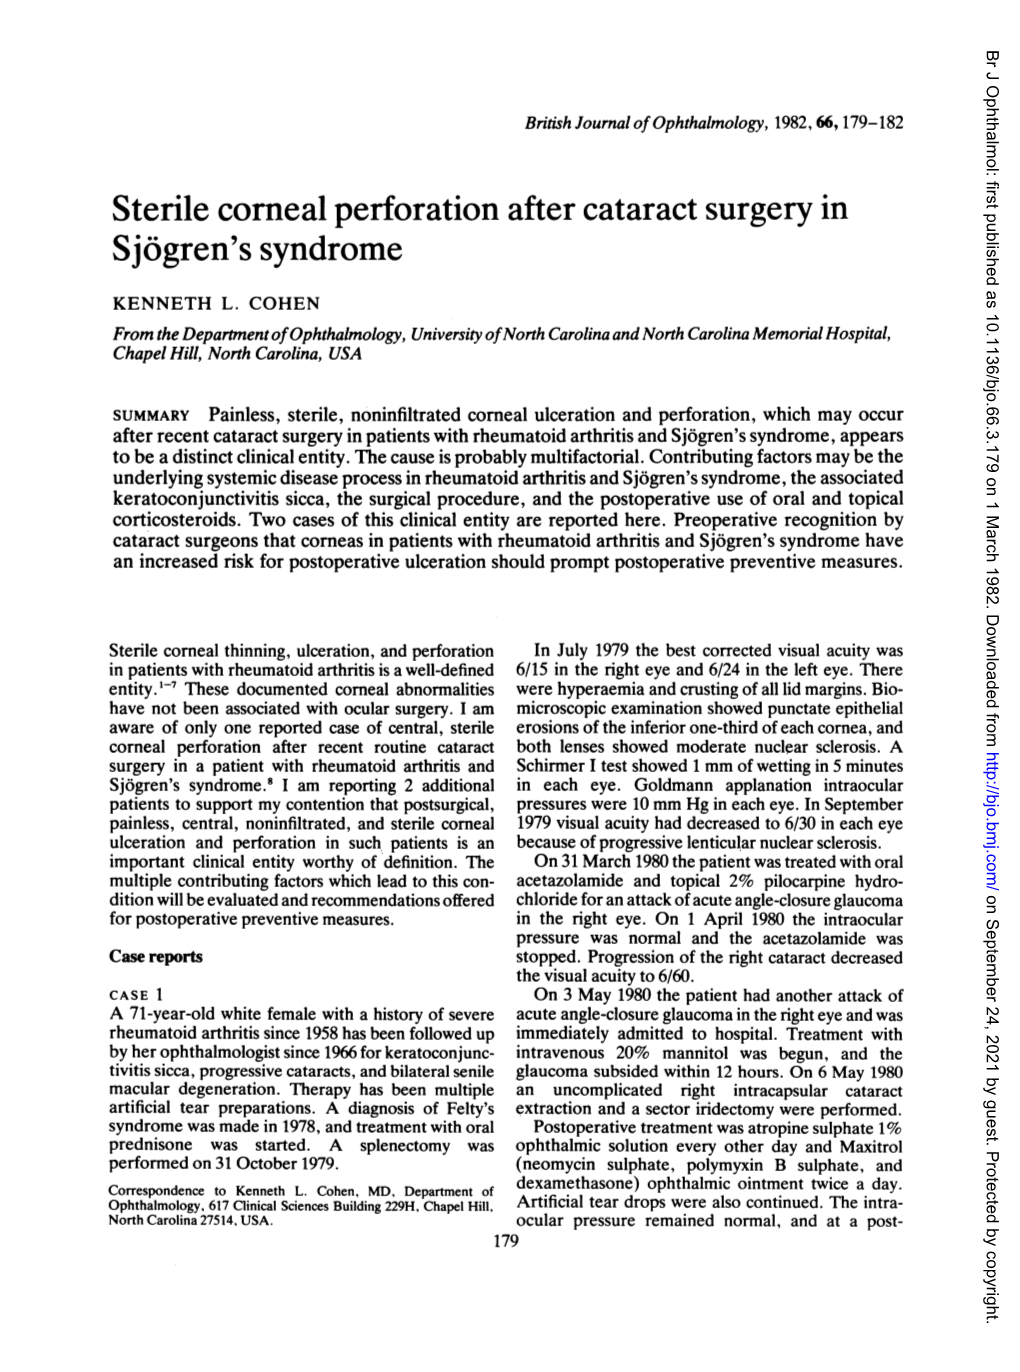 Sterile Comeal Perforation After Cataract Surgery in Sjogren's Syndrome